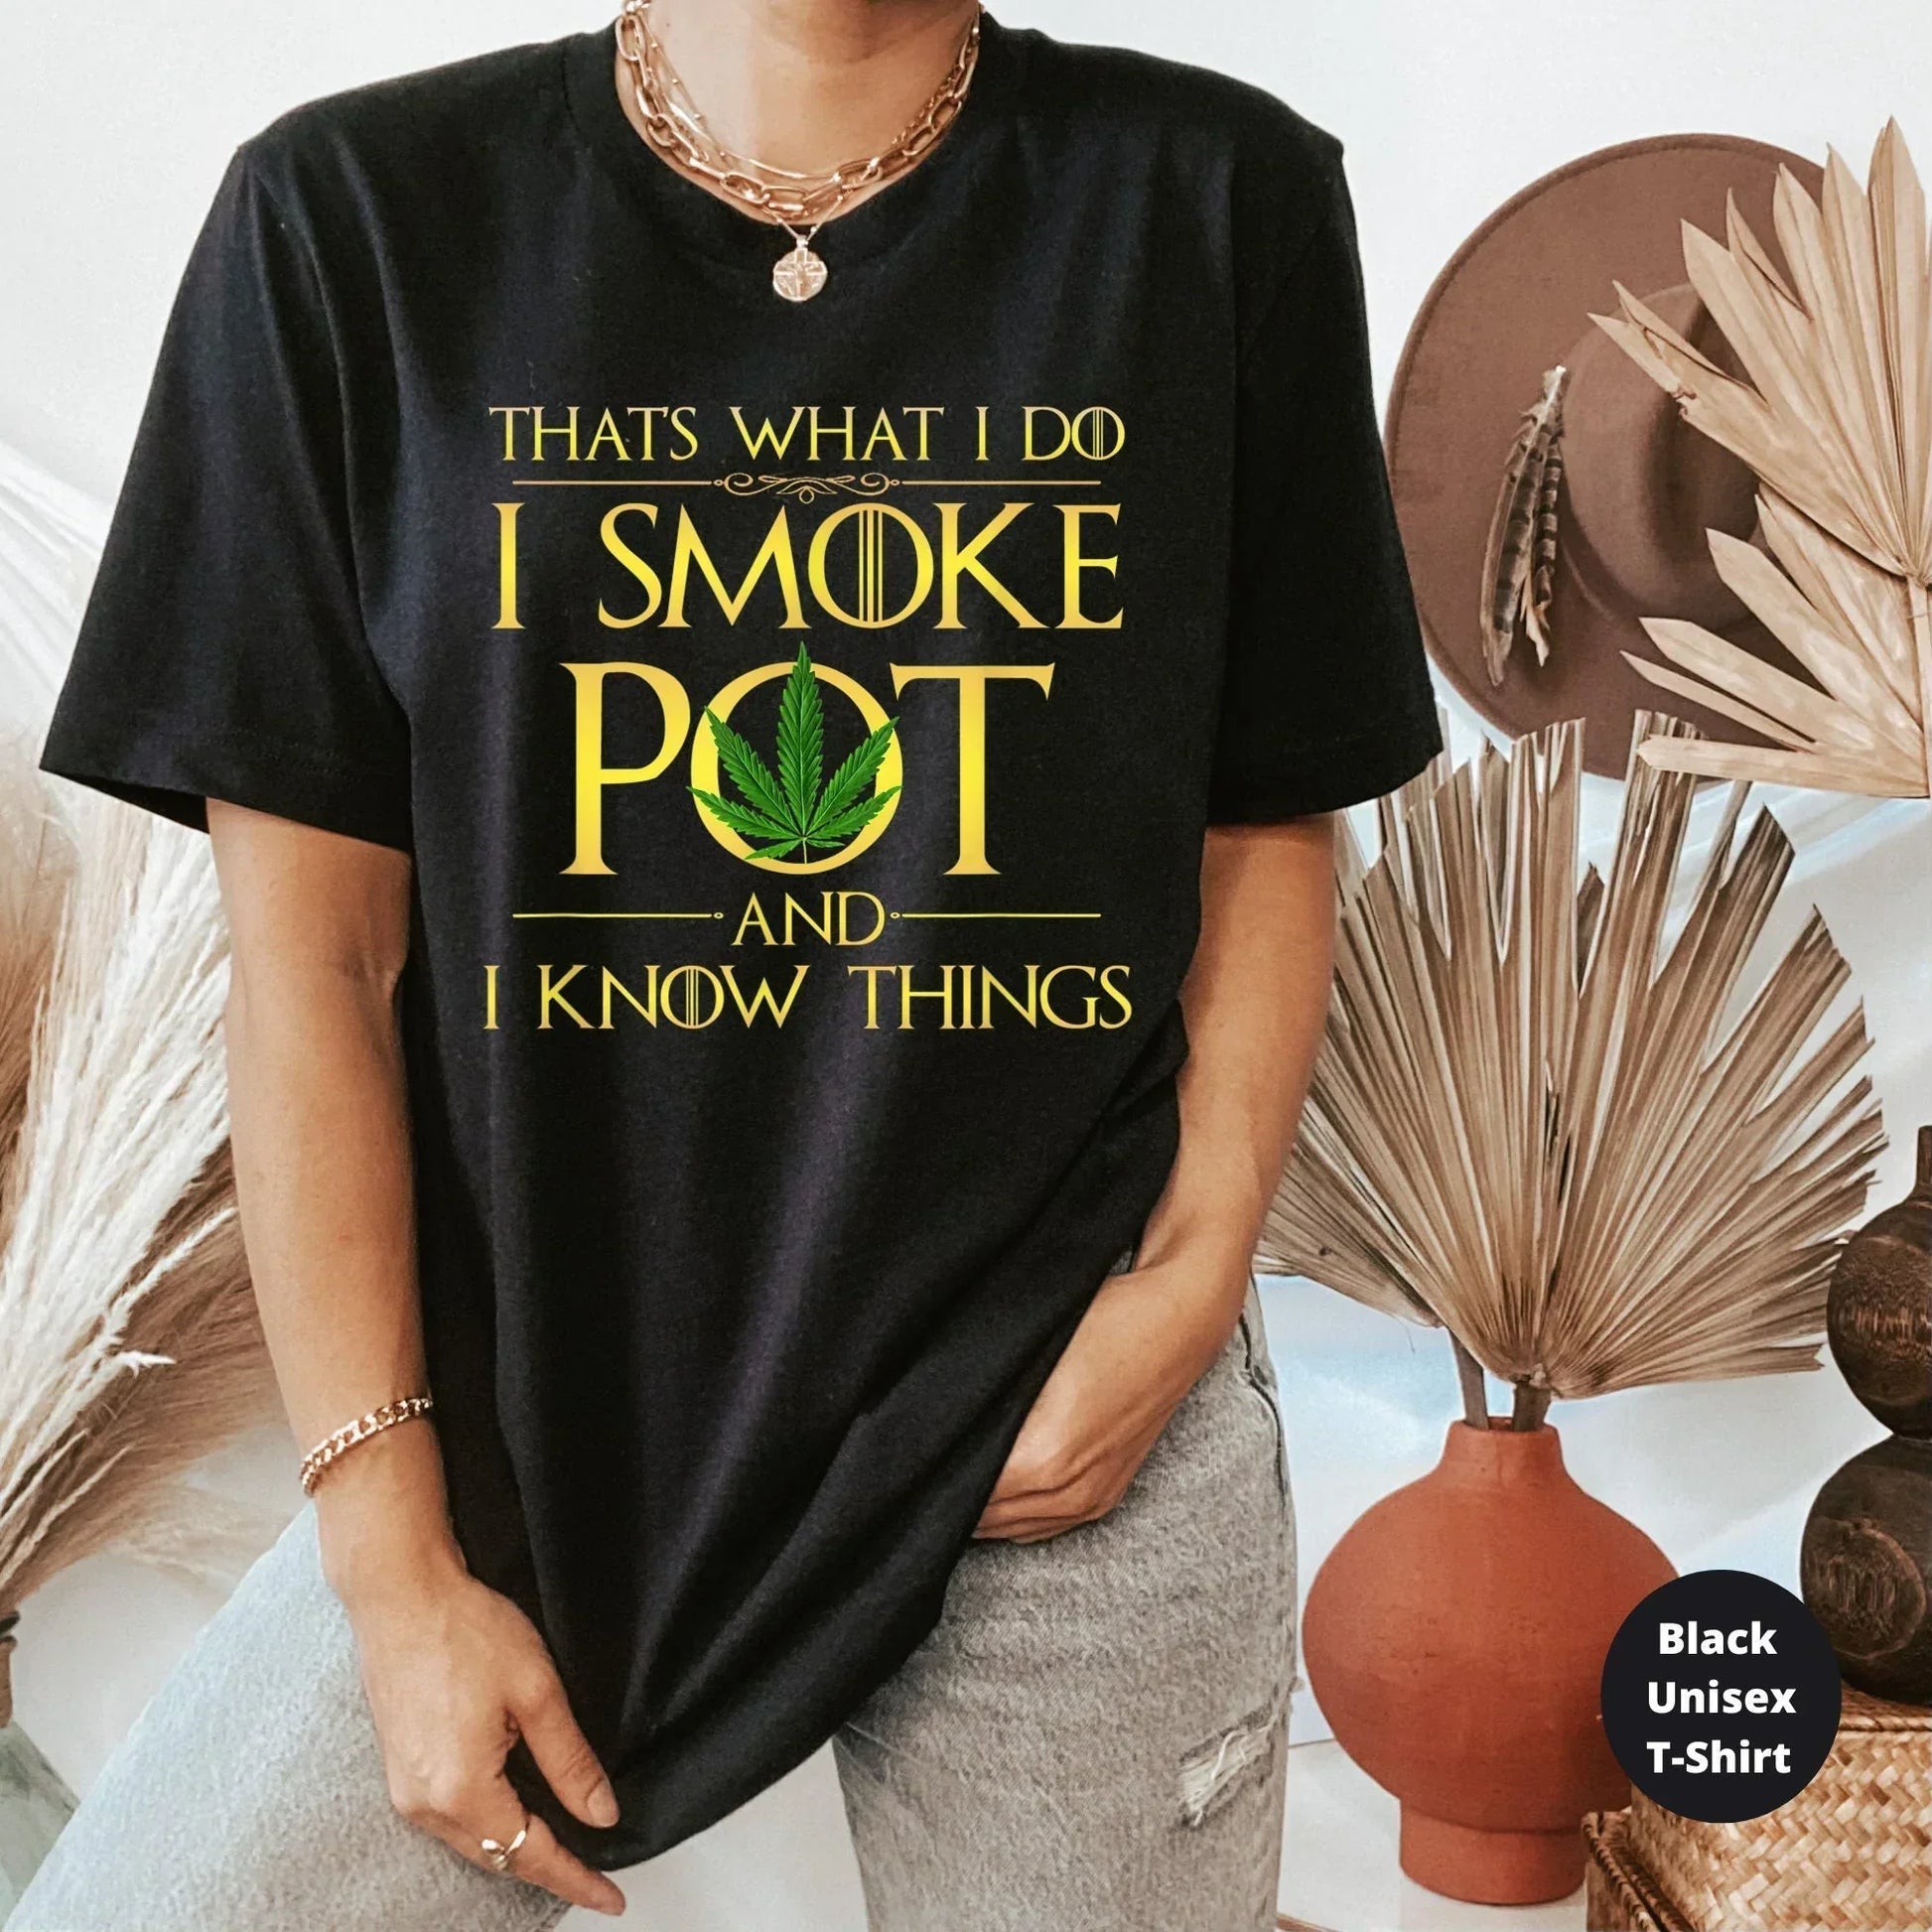 That's What I Do, I Smoke Pot and Know Things, Funny Stoner Shirt